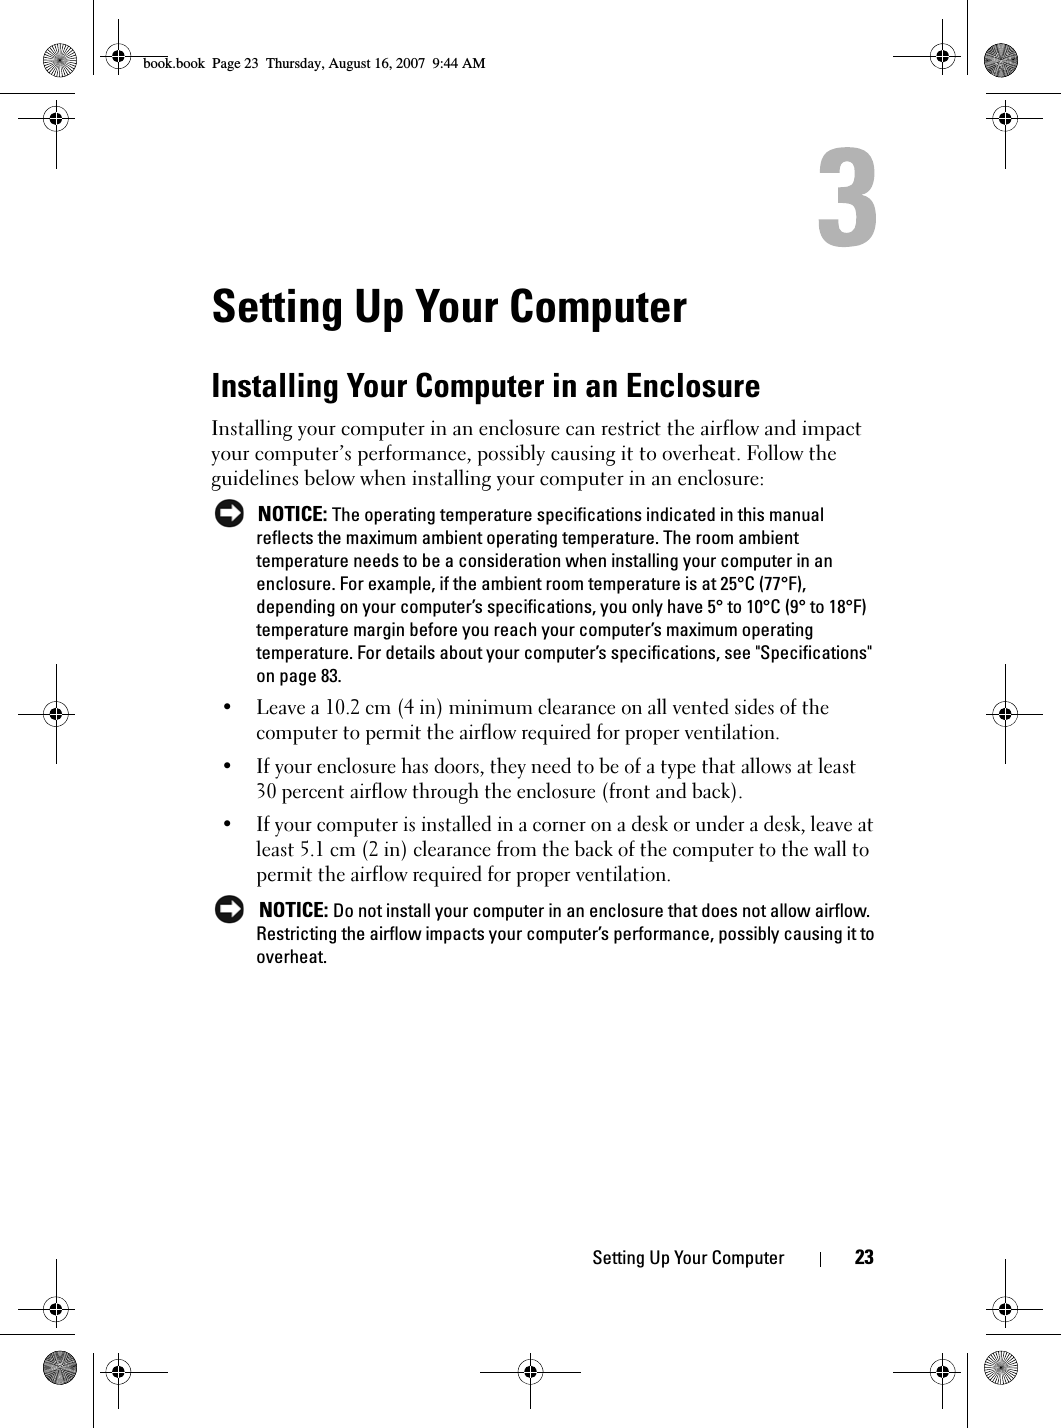 Setting Up Your Computer 23Setting Up Your ComputerInstalling Your Computer in an EnclosureInstalling your computer in an enclosure can restrict the airflow and impact your computer’s performance, possibly causing it to overheat. Follow the guidelines below when installing your computer in an enclosure: NOTICE: The operating temperature specifications indicated in this manual reflects the maximum ambient operating temperature. The room ambient temperature needs to be a consideration when installing your computer in an enclosure. For example, if the ambient room temperature is at 25°C (77°F), depending on your computer’s specifications, you only have 5° to 10°C (9° to 18°F) temperature margin before you reach your computer’s maximum operating temperature. For details about your computer’s specifications, see &quot;Specifications&quot; on page 83.• Leave a 10.2 cm (4 in) minimum clearance on all vented sides of the computer to permit the airflow required for proper ventilation.• If your enclosure has doors, they need to be of a type that allows at least 30 percent airflow through the enclosure (front and back).• If your computer is installed in a corner on a desk or under a desk, leave at least 5.1 cm (2 in) clearance from the back of the computer to the wall to permit the airflow required for proper ventilation. NOTICE: Do not install your computer in an enclosure that does not allow airflow. Restricting the airflow impacts your computer’s performance, possibly causing it to overheat.book.book  Page 23  Thursday, August 16, 2007  9:44 AM